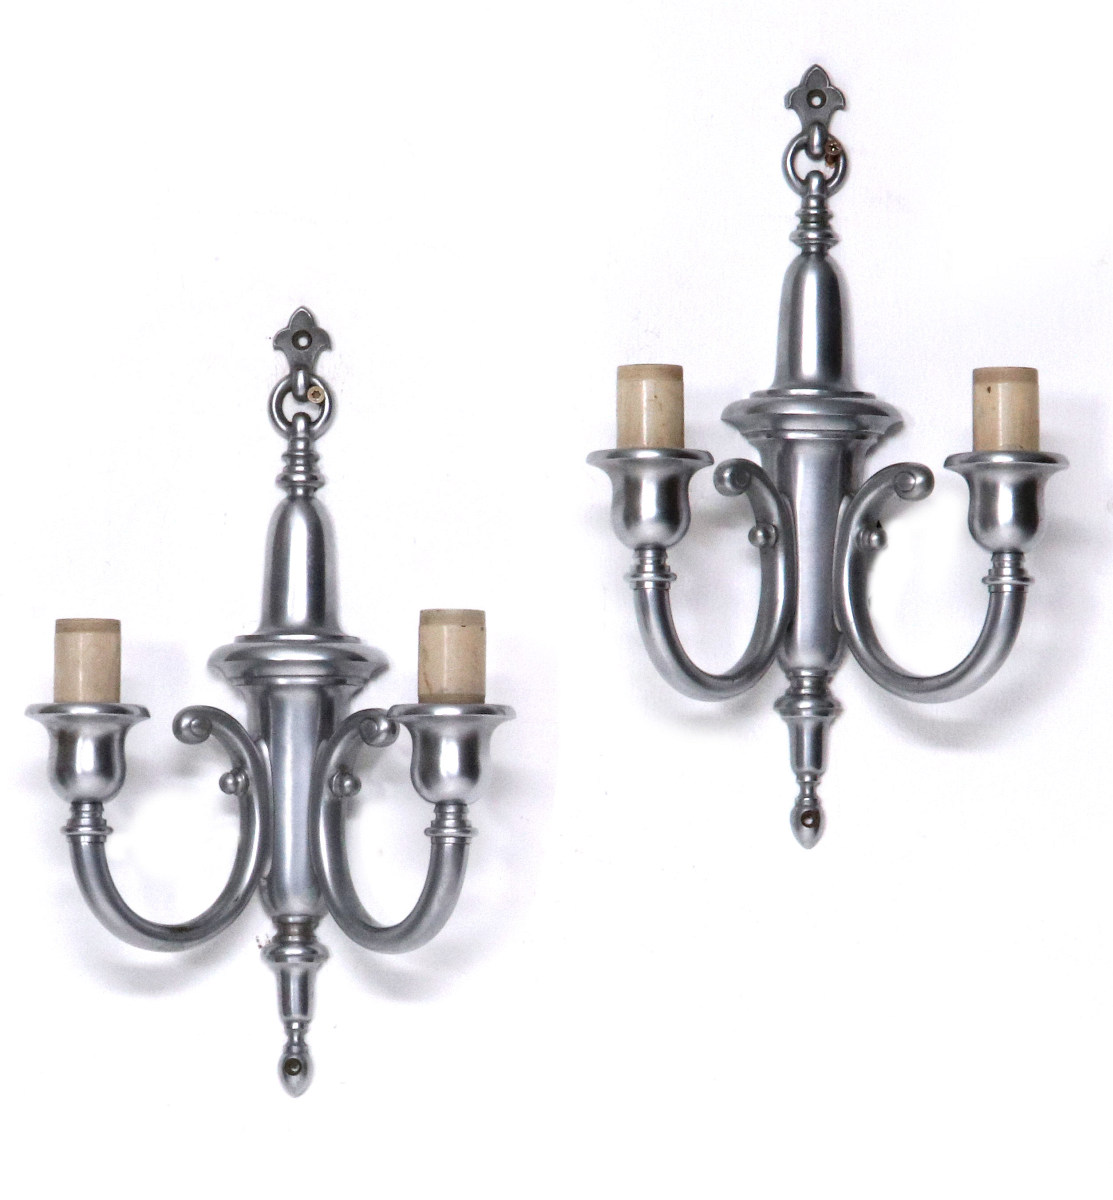 A PAIR OF TWO-LIGHT RAIL CAR WALL SCONCES